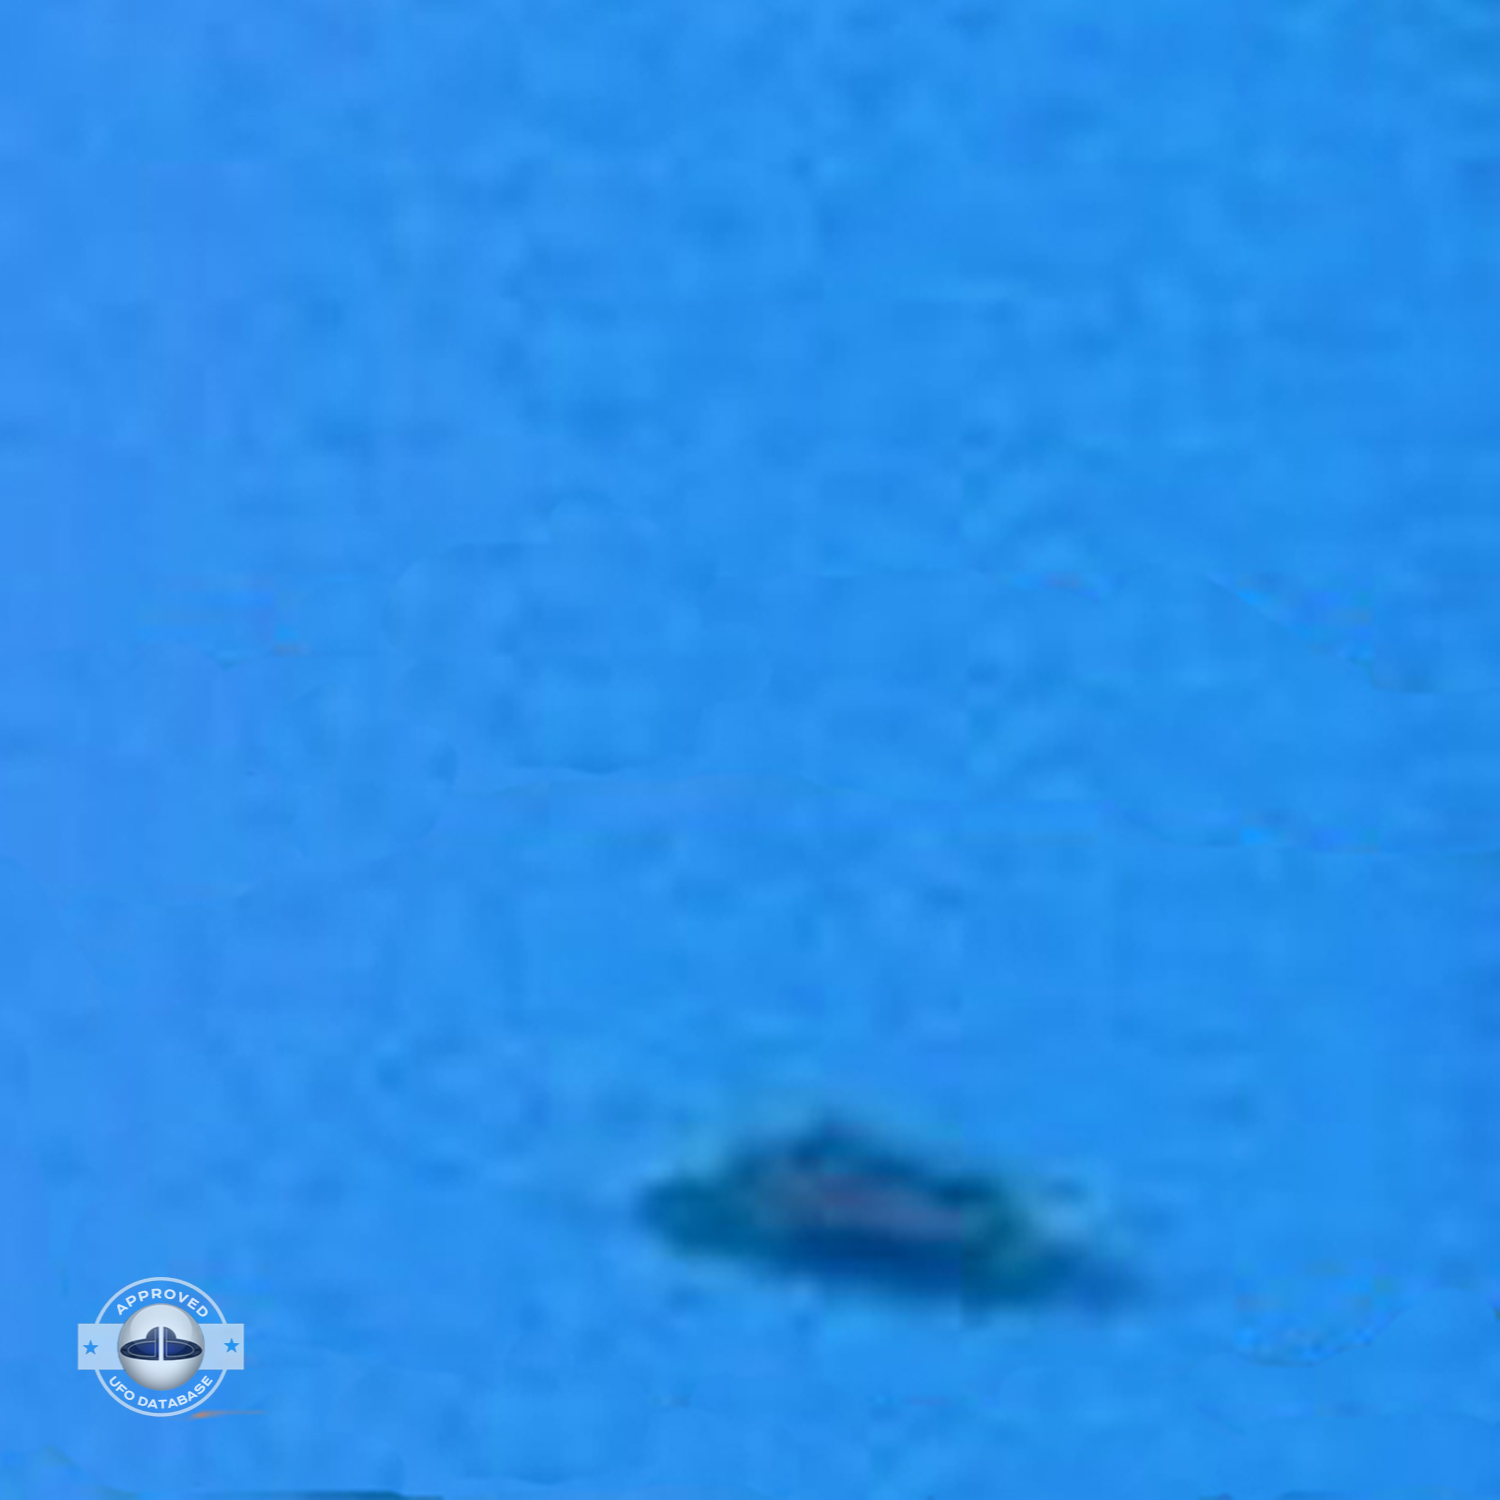 Picture of UFO near airplane over Vnukovo Airport | Moscow, Russia UFO Picture #179-4